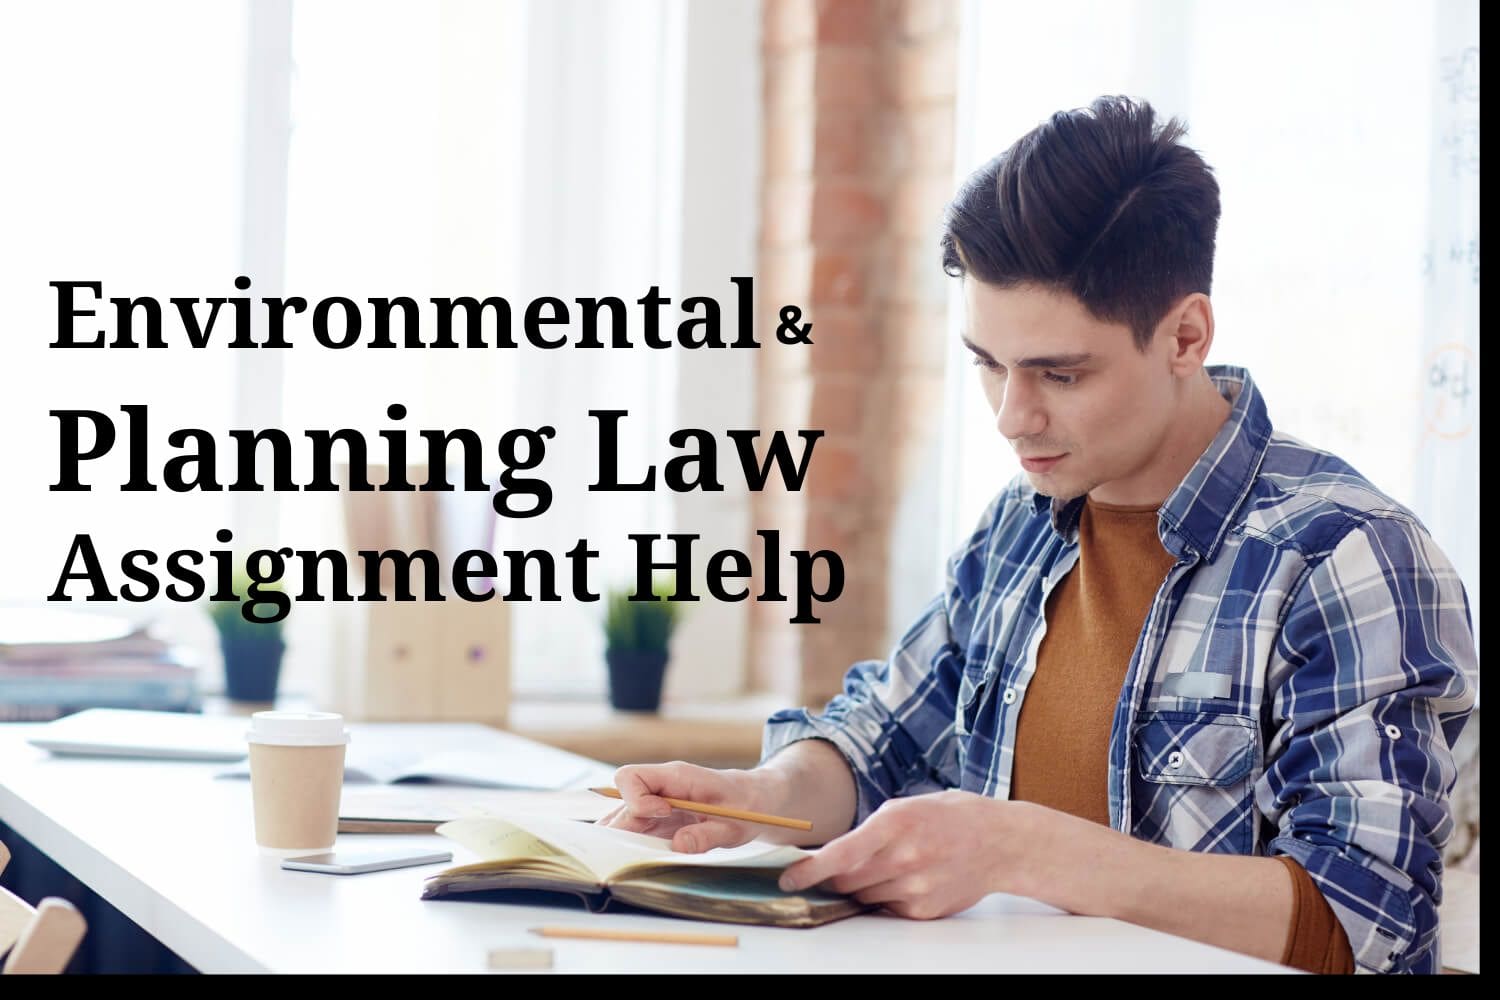 Enjoy good scores with our outstanding Environmental and Planning Law Assignment Help